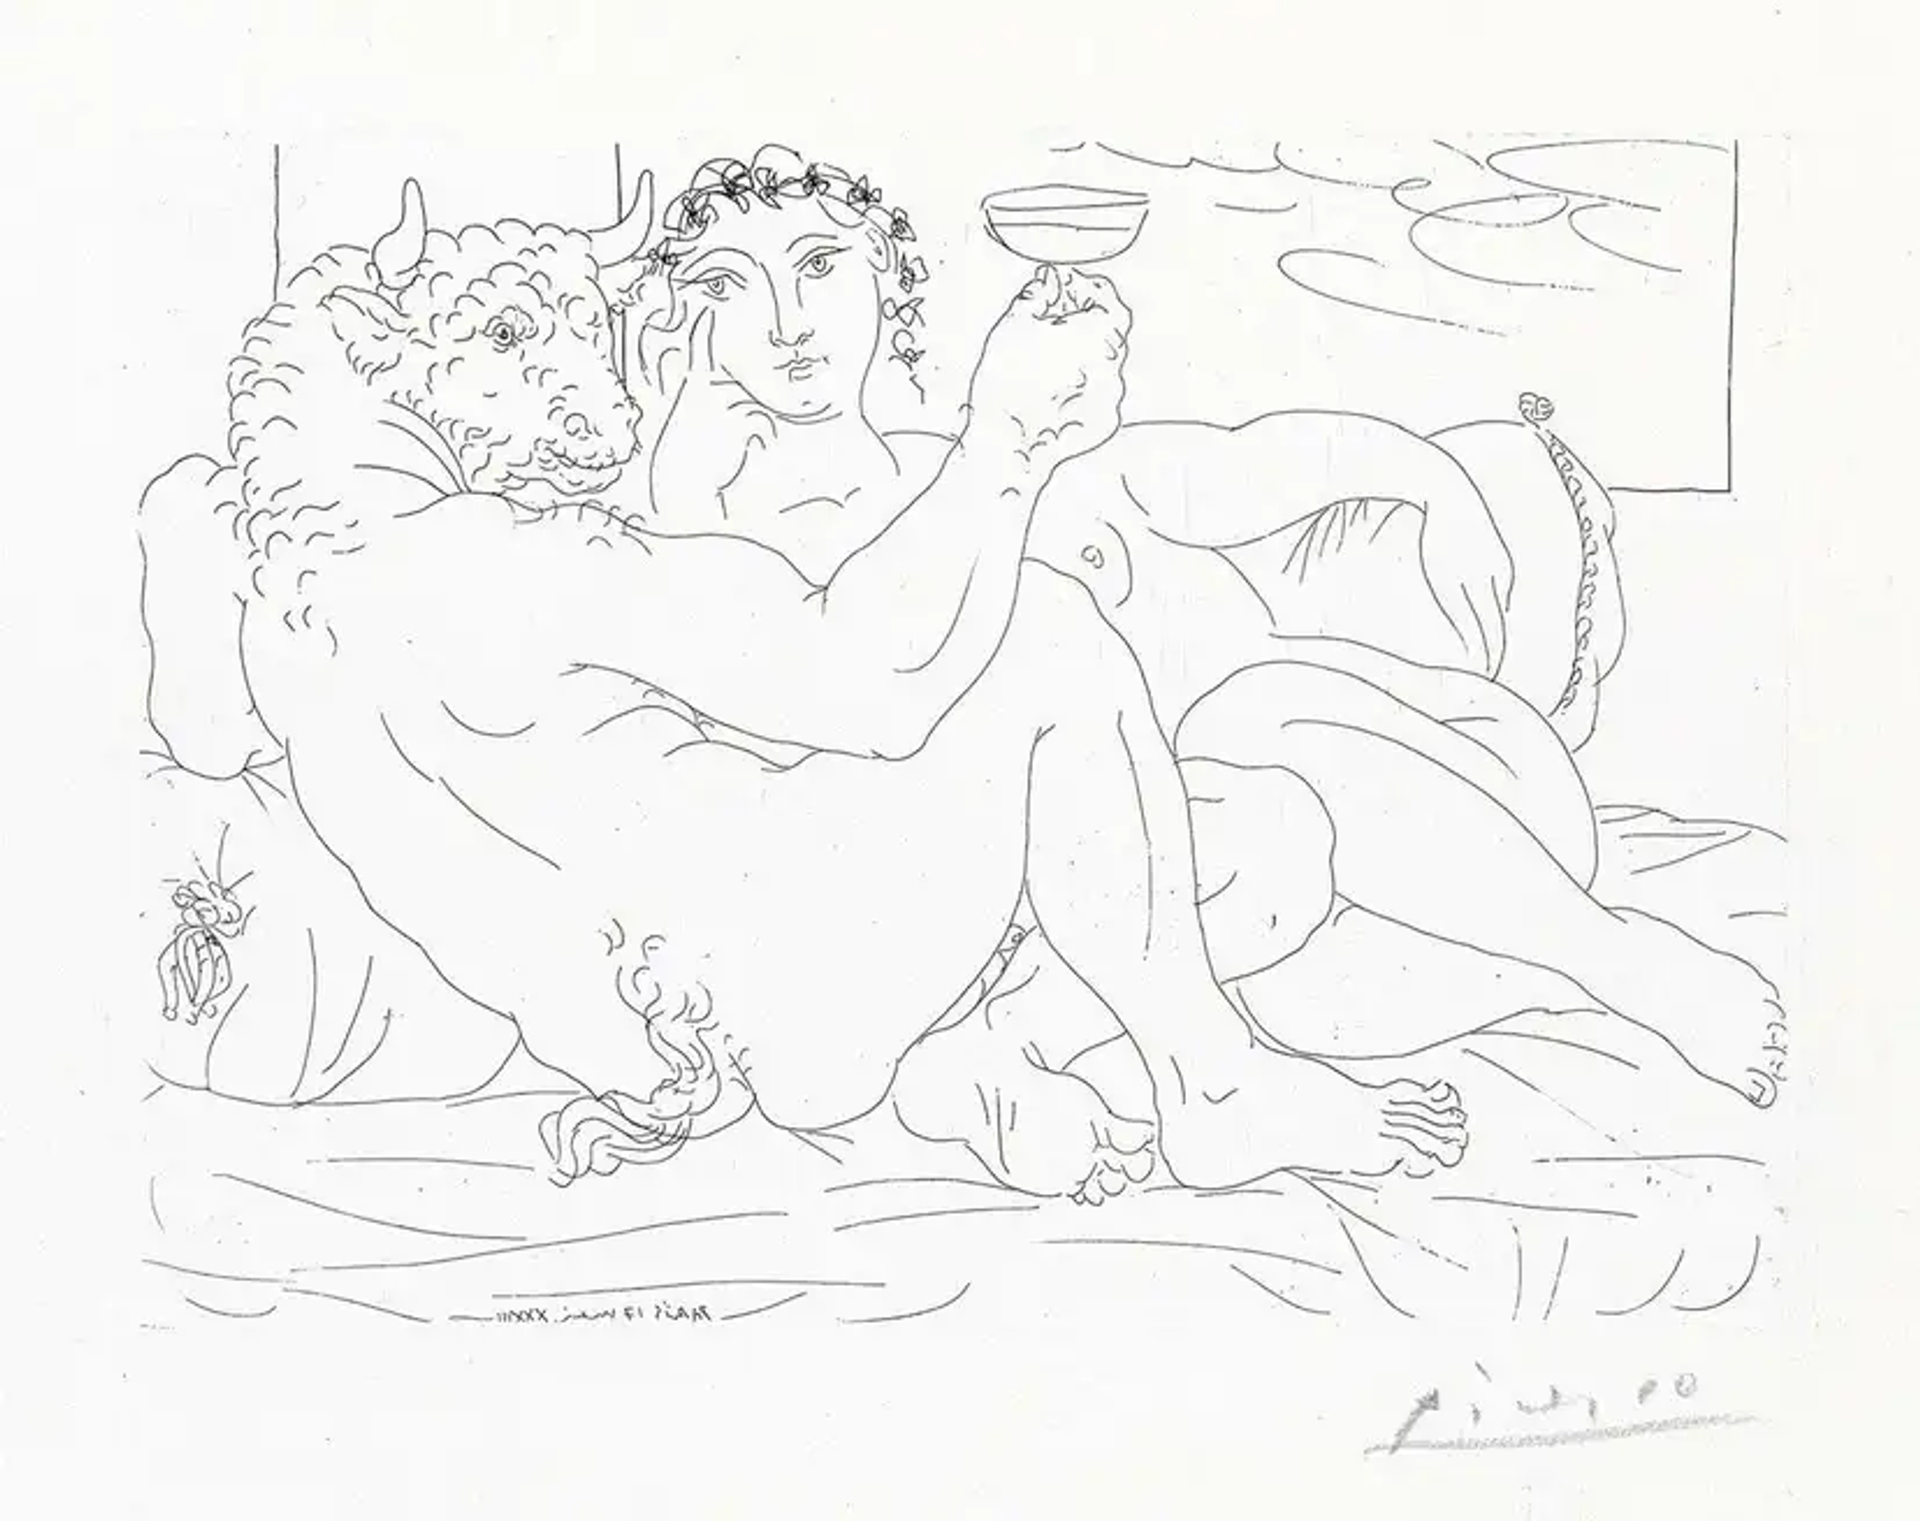 This etching by Picasso shows a minotaur holding a glass of wine, looking at the viewer while a nude female lies next to him in bed and gazes at him.